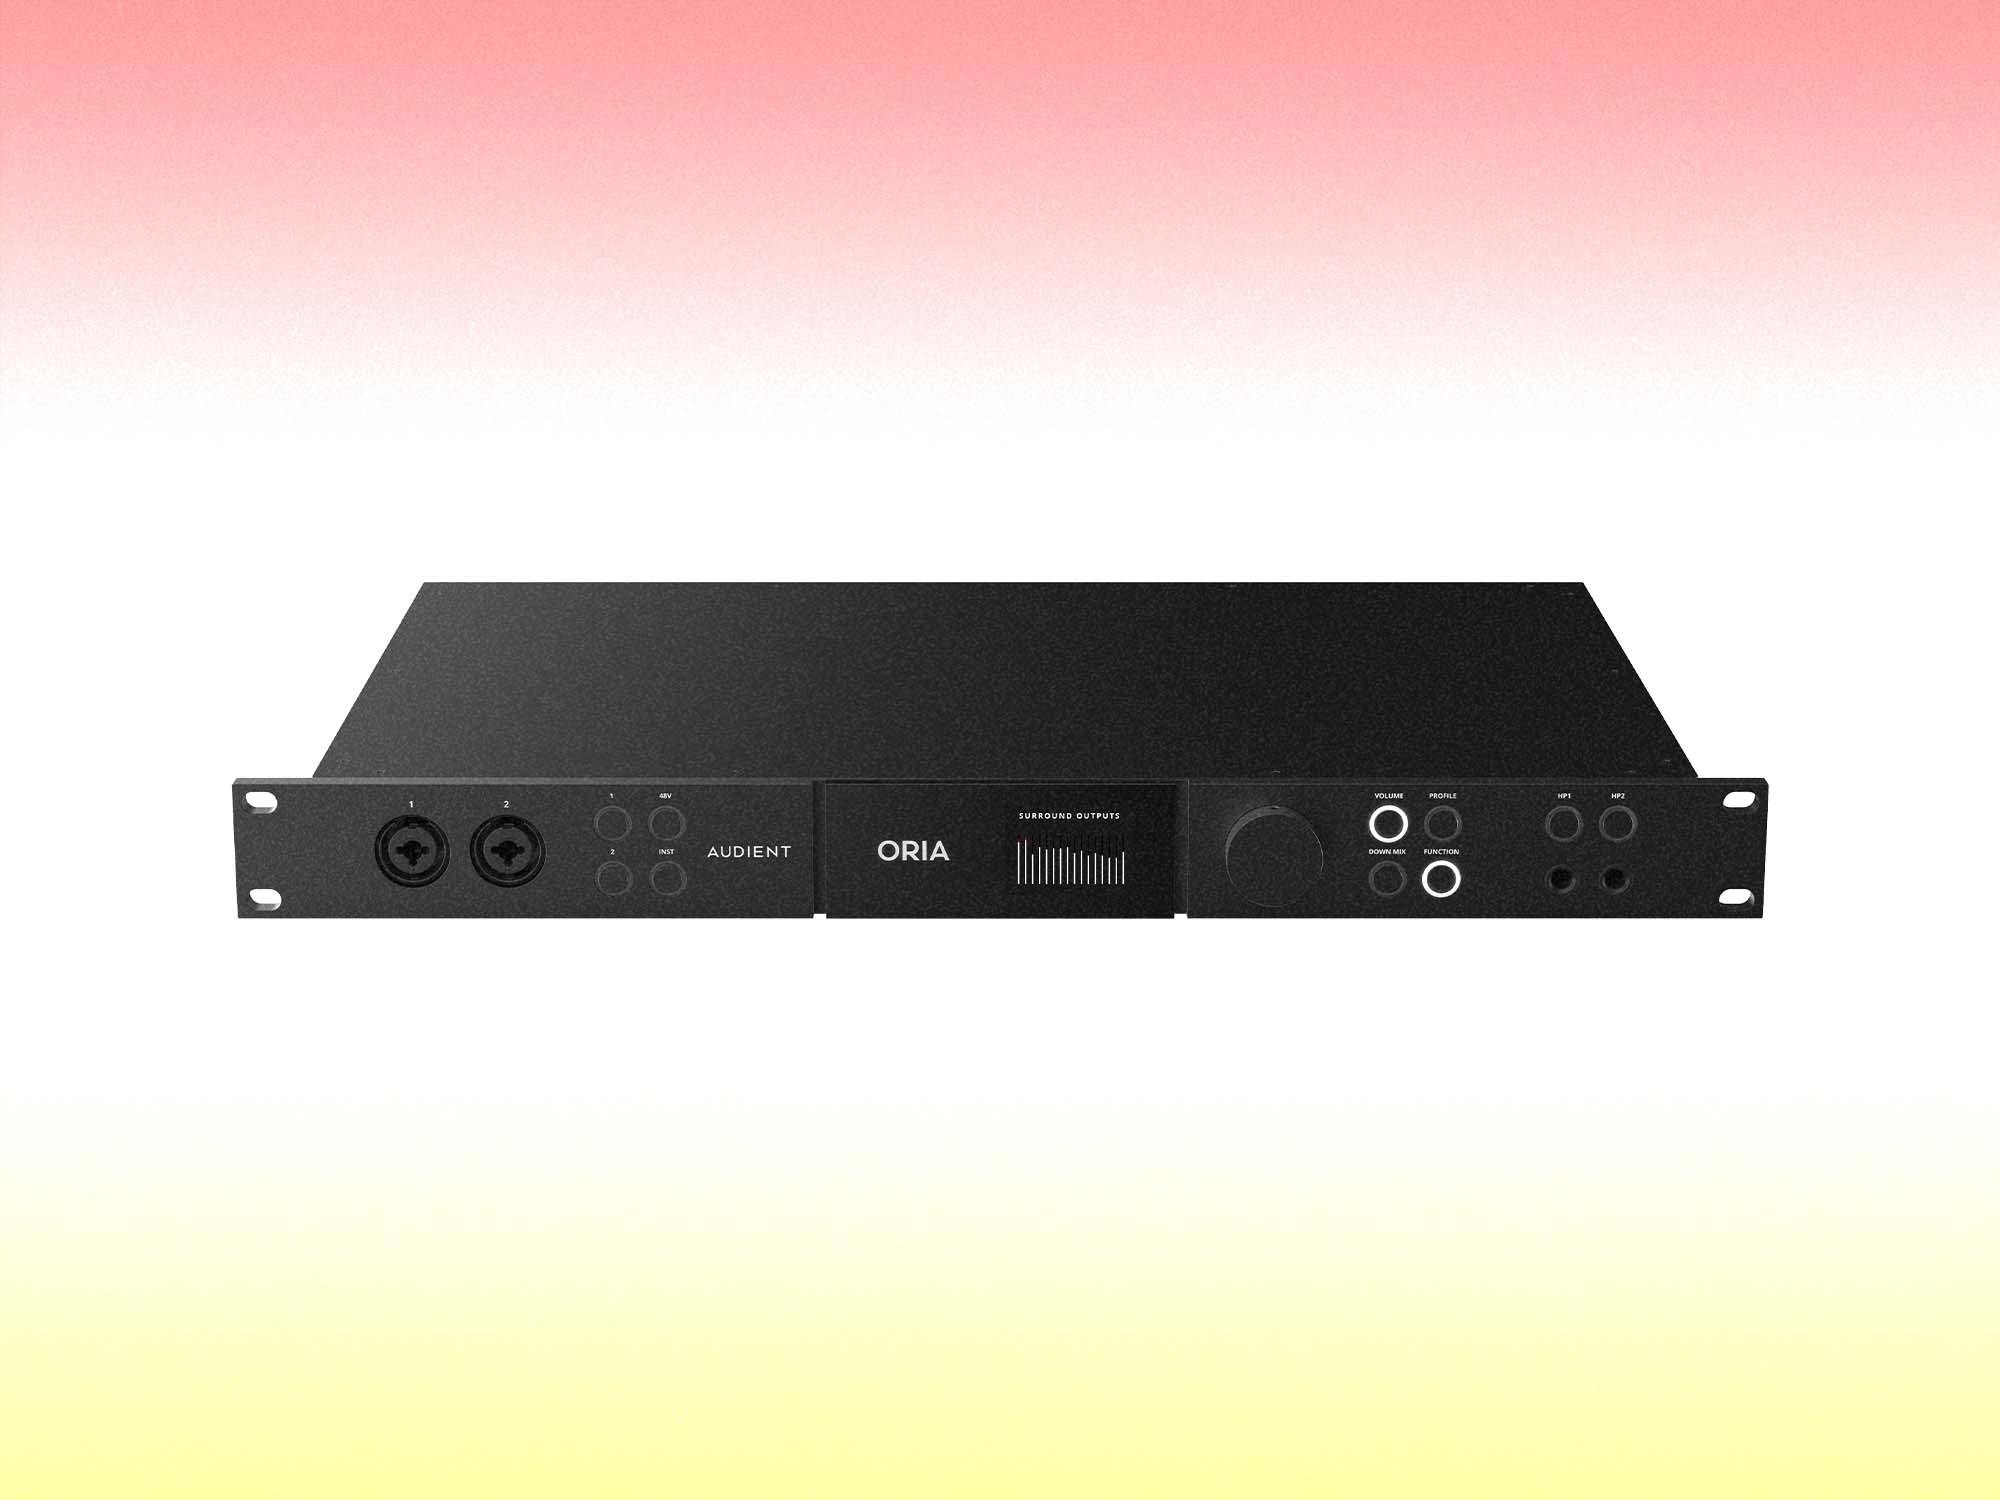 ORIA from Audient. It is a black, streamlined interface.